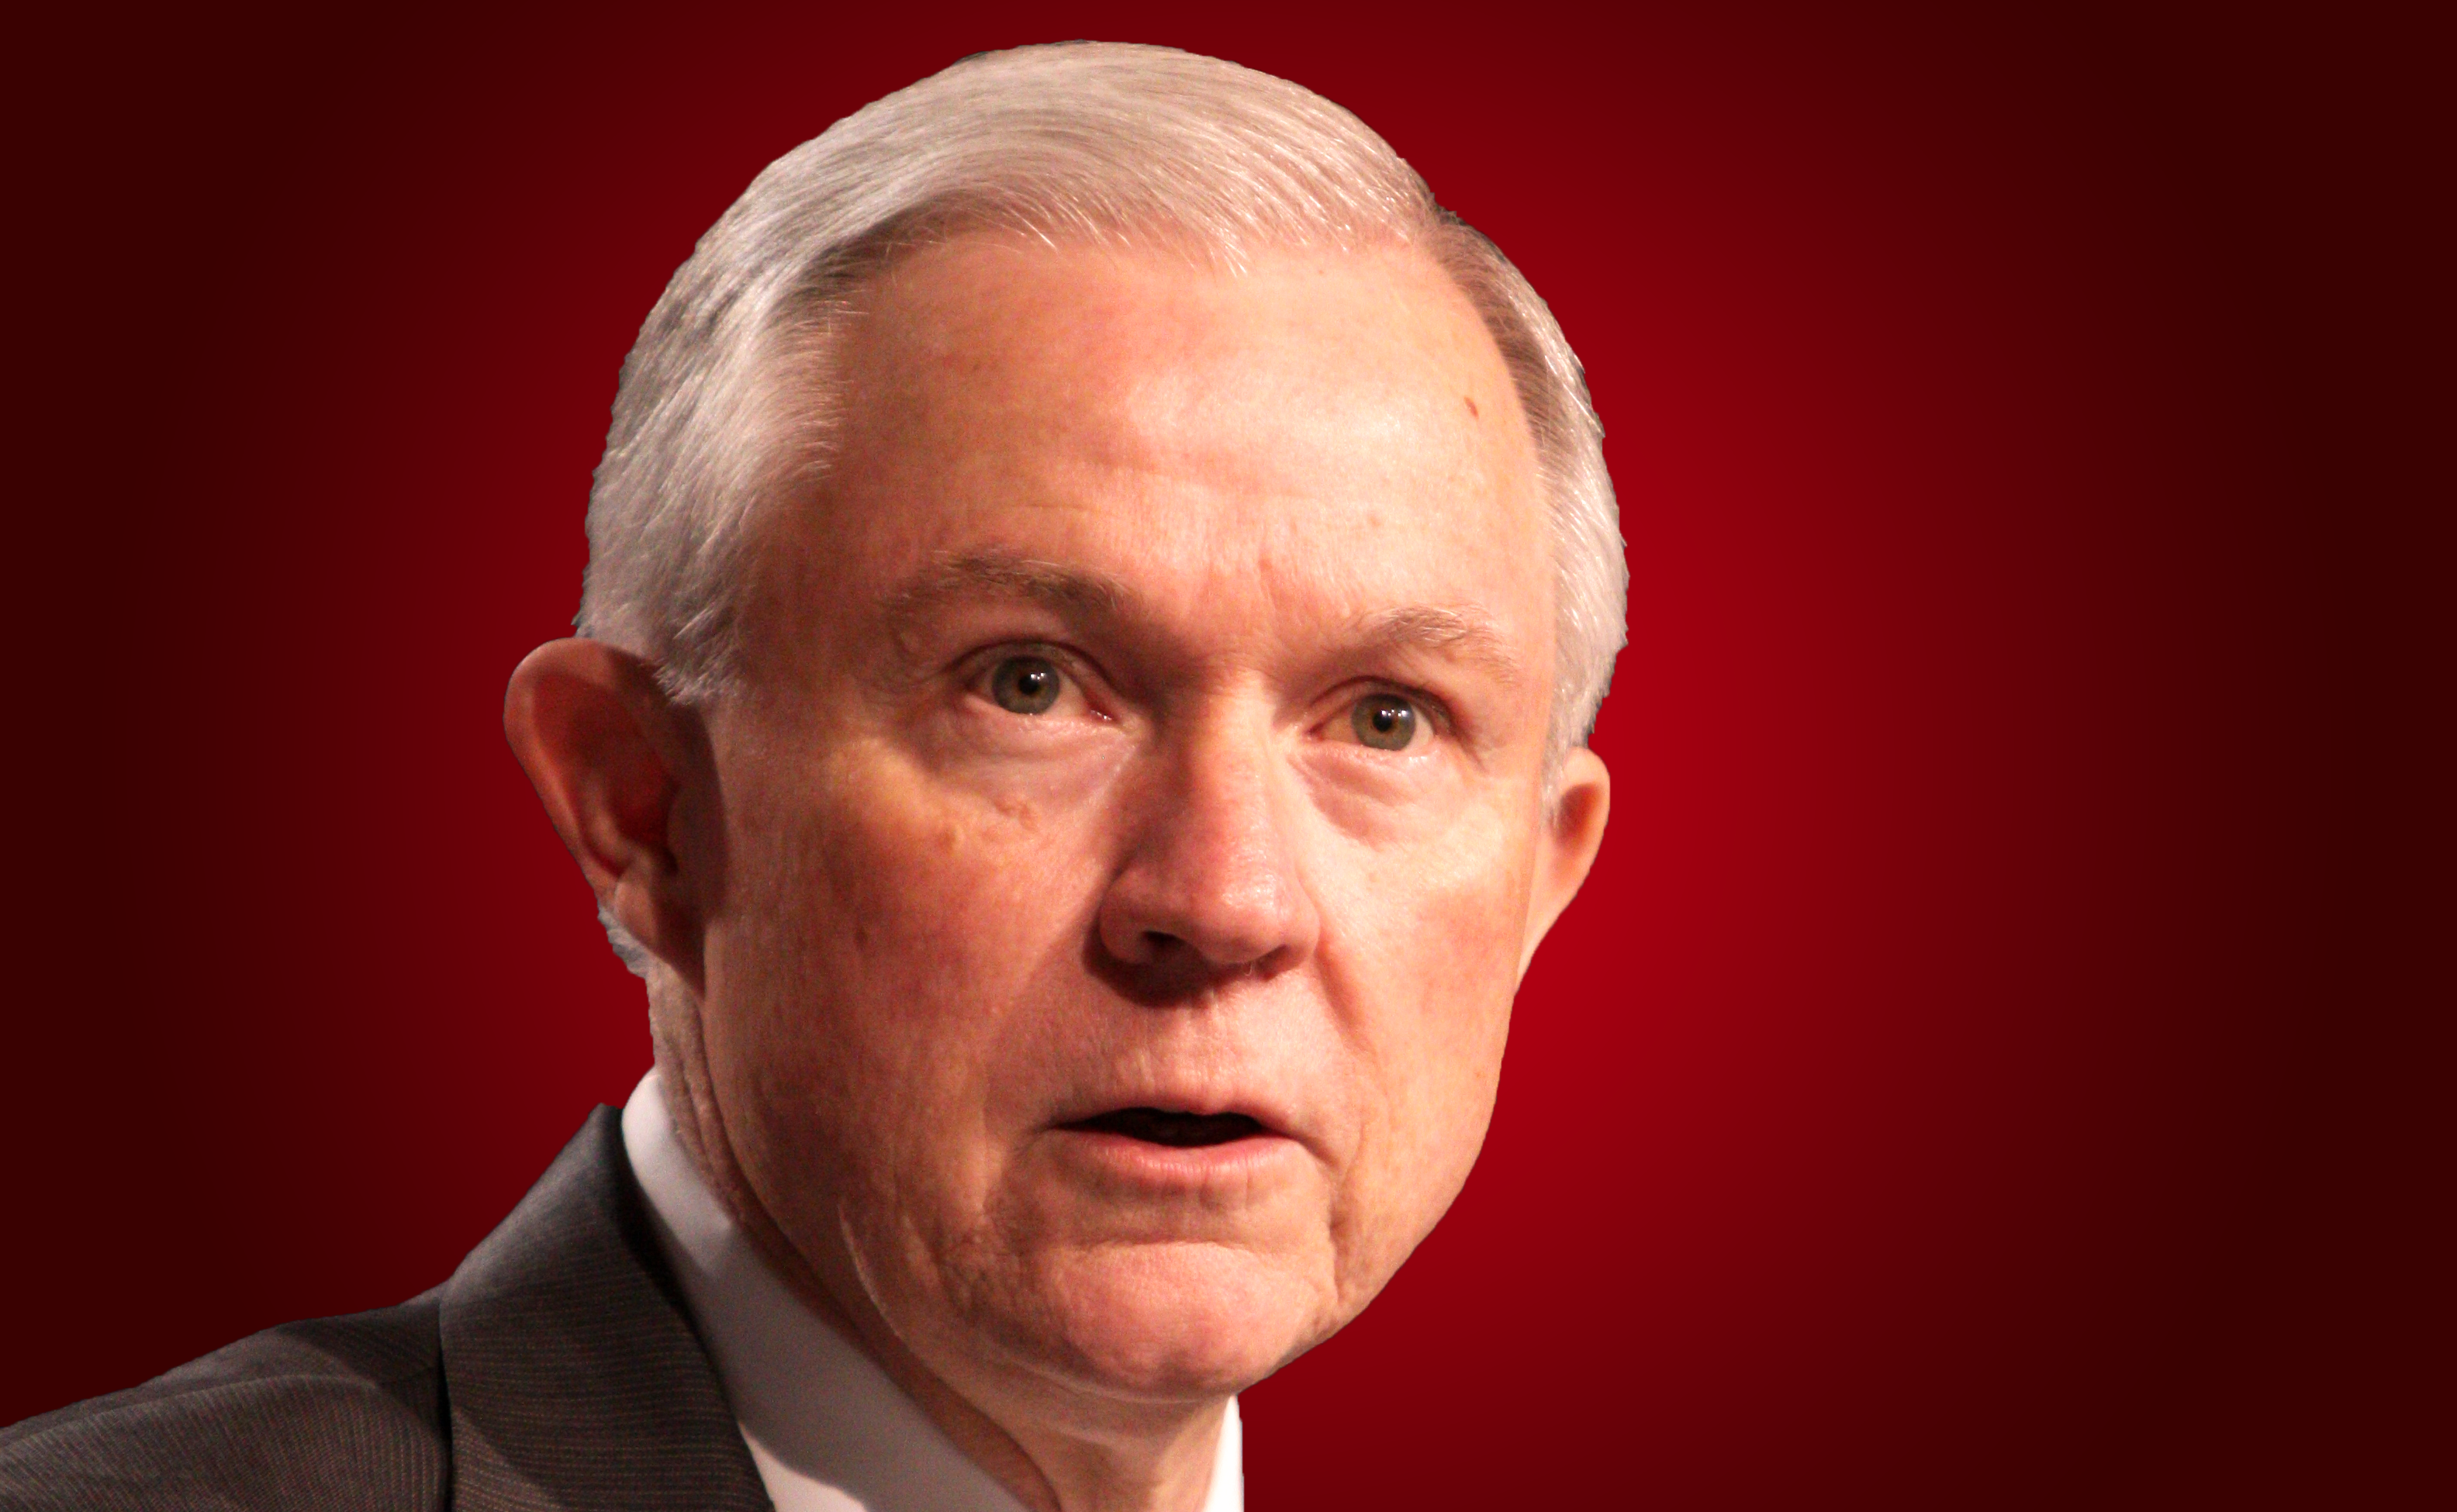 Jeff Sessions Nomination for Attorney General is Highly Concerning to Future of Immigration Policy